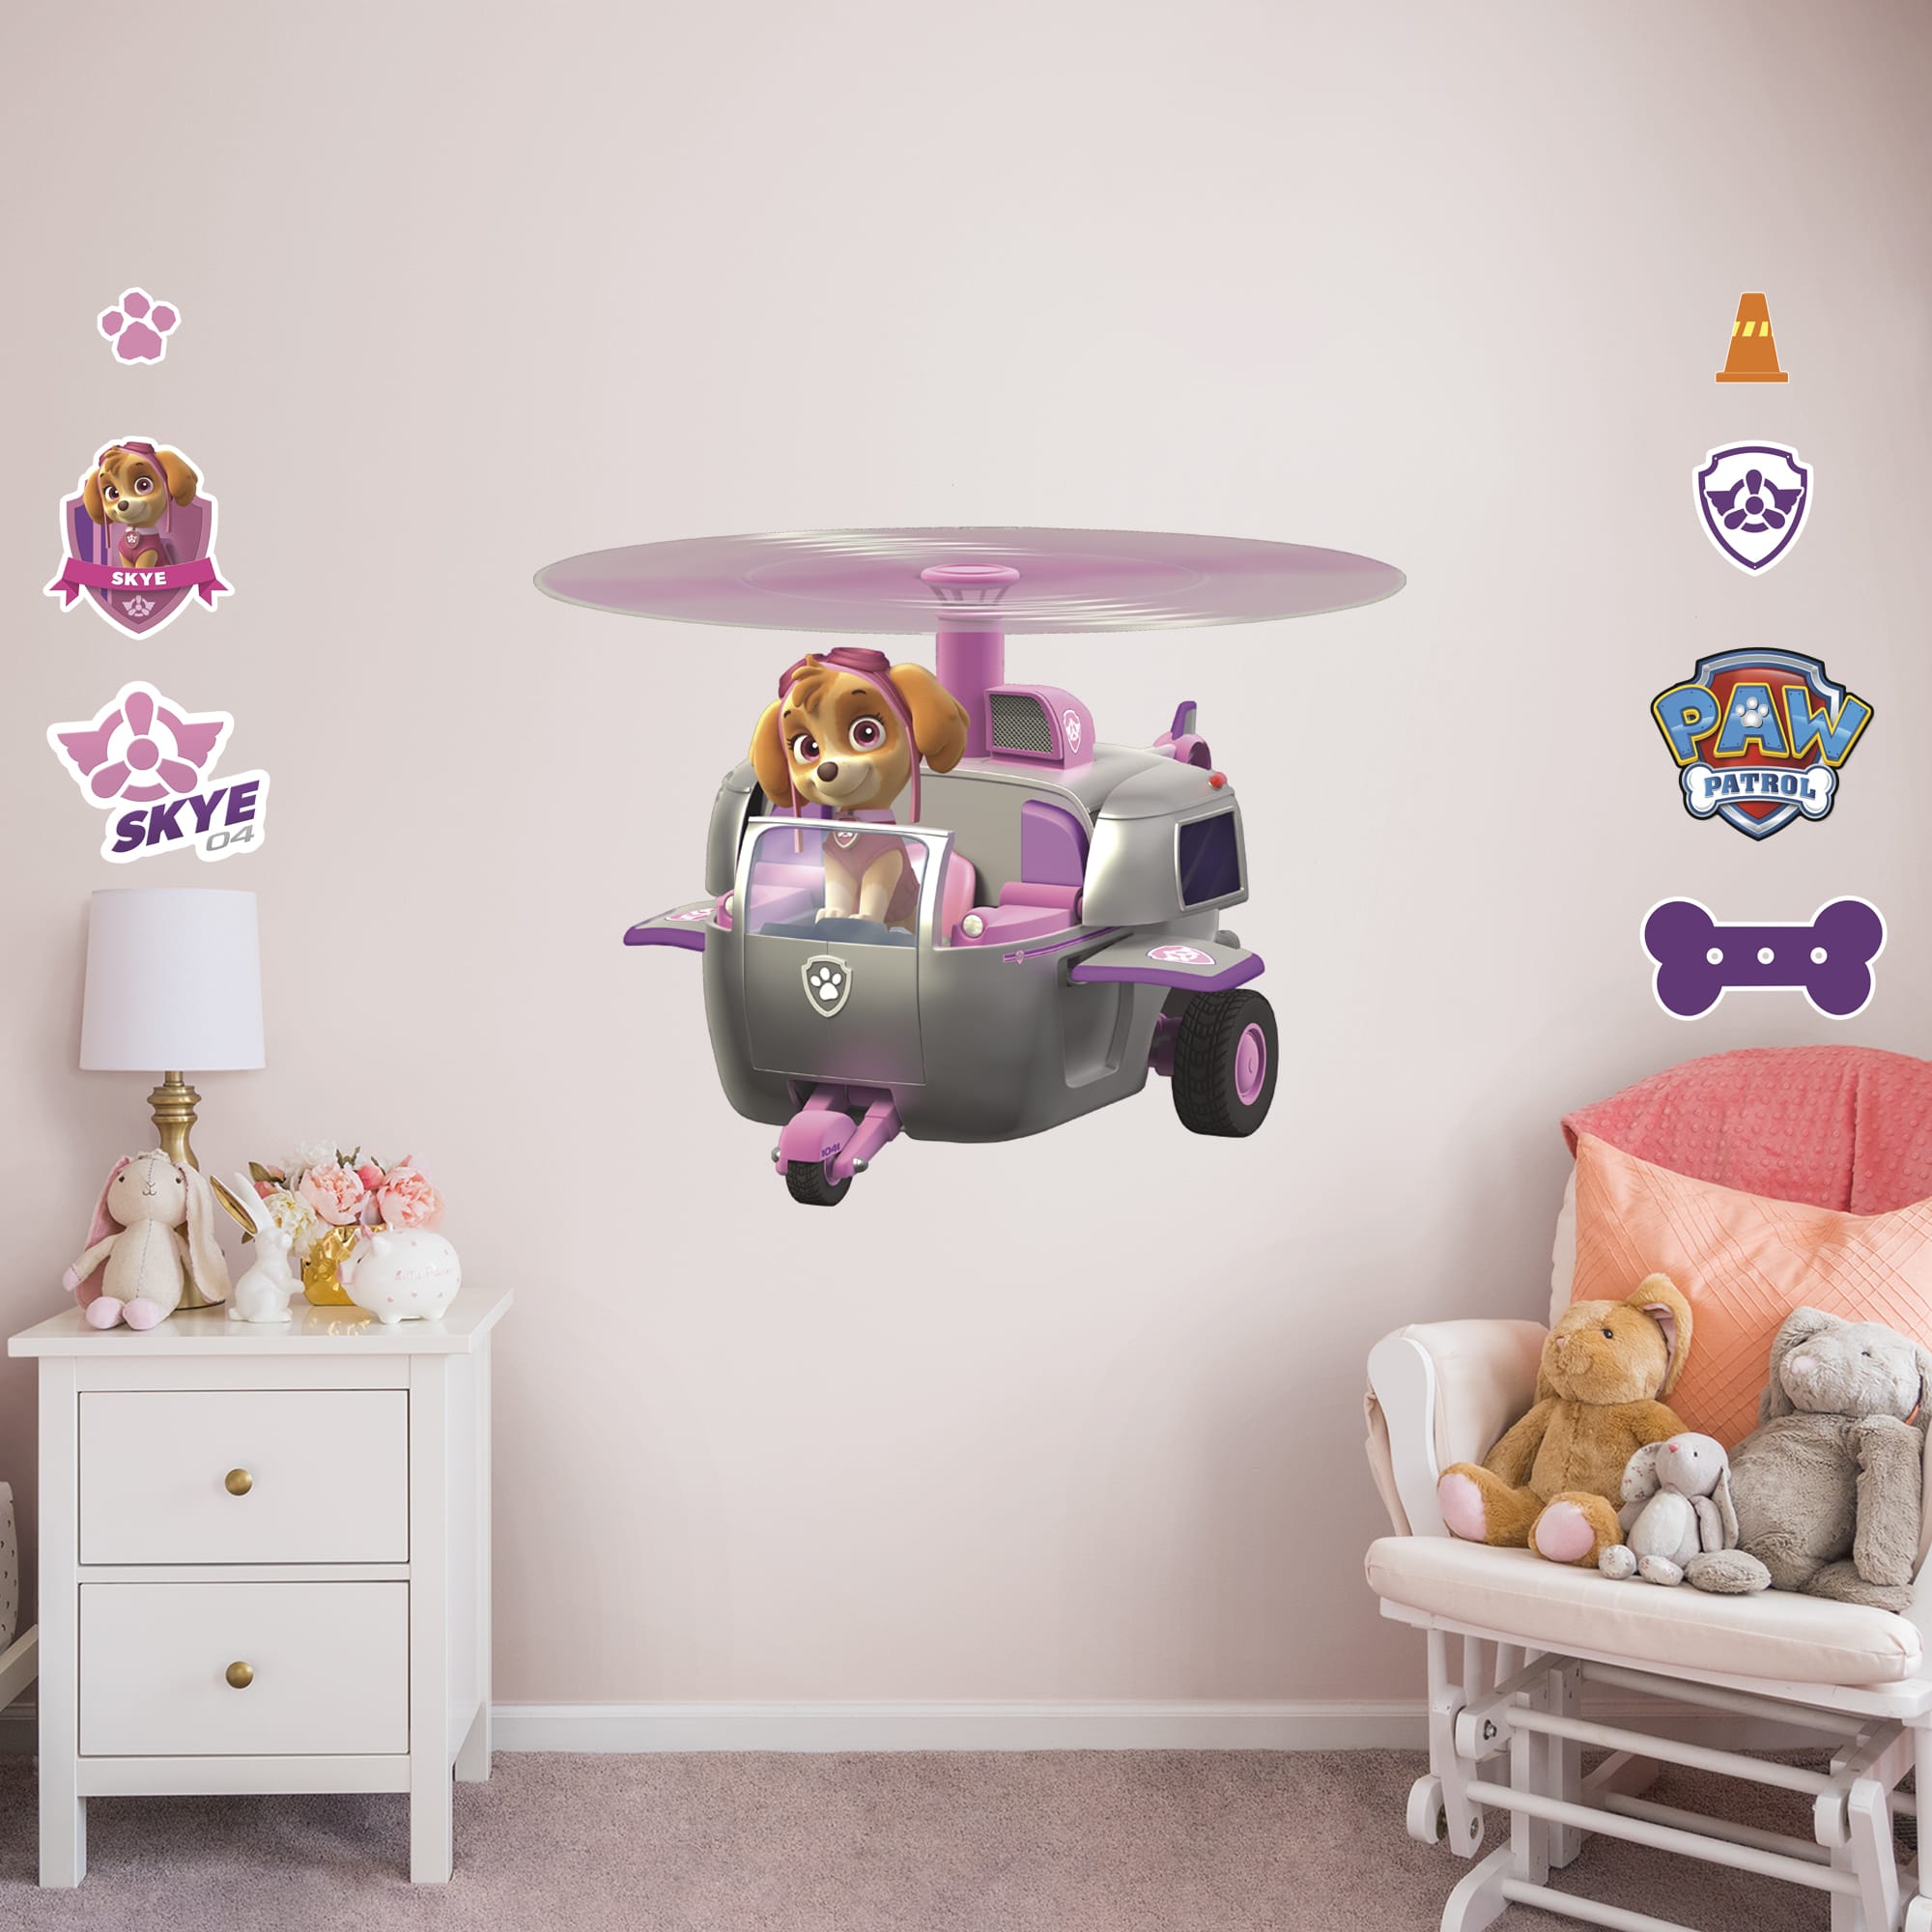 Skye: Helicopter - Officially Licensed PAW Patrol Removable Wall Decal Giant Character + 8 Licensed Decals (49"W x 38"H) by Fath